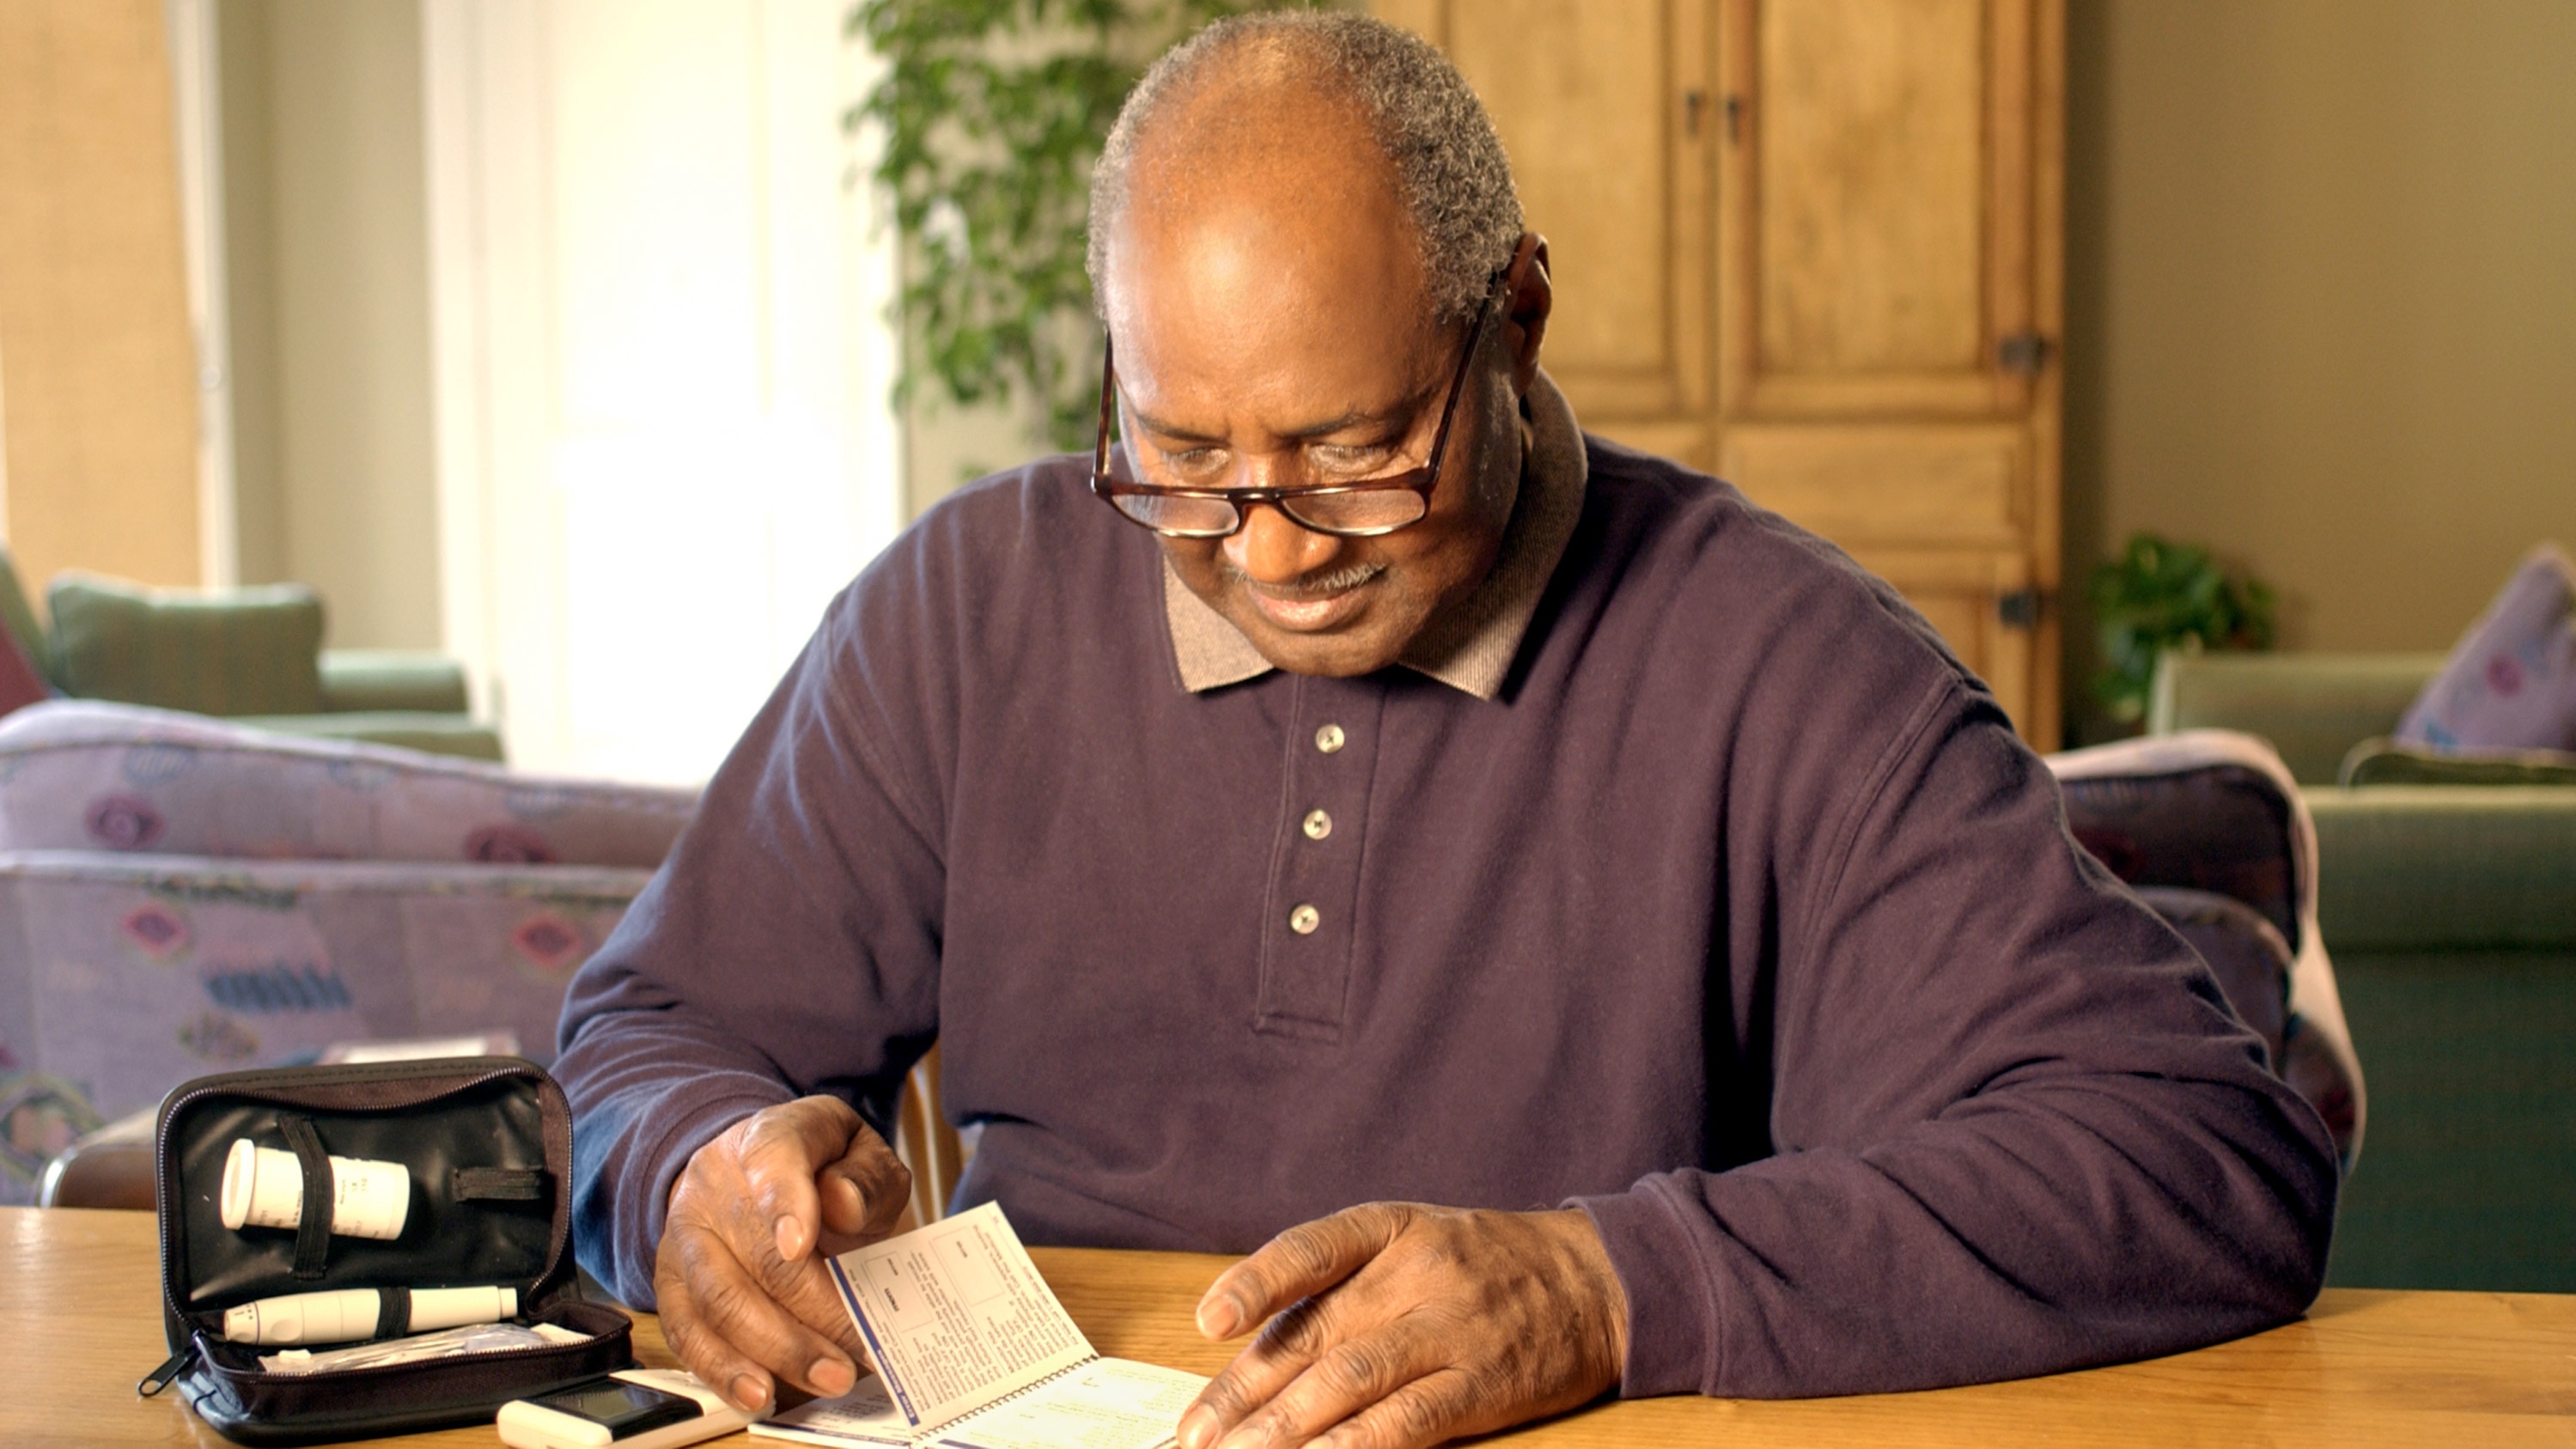 An older black man seated at a table reading manual for blood test kit.